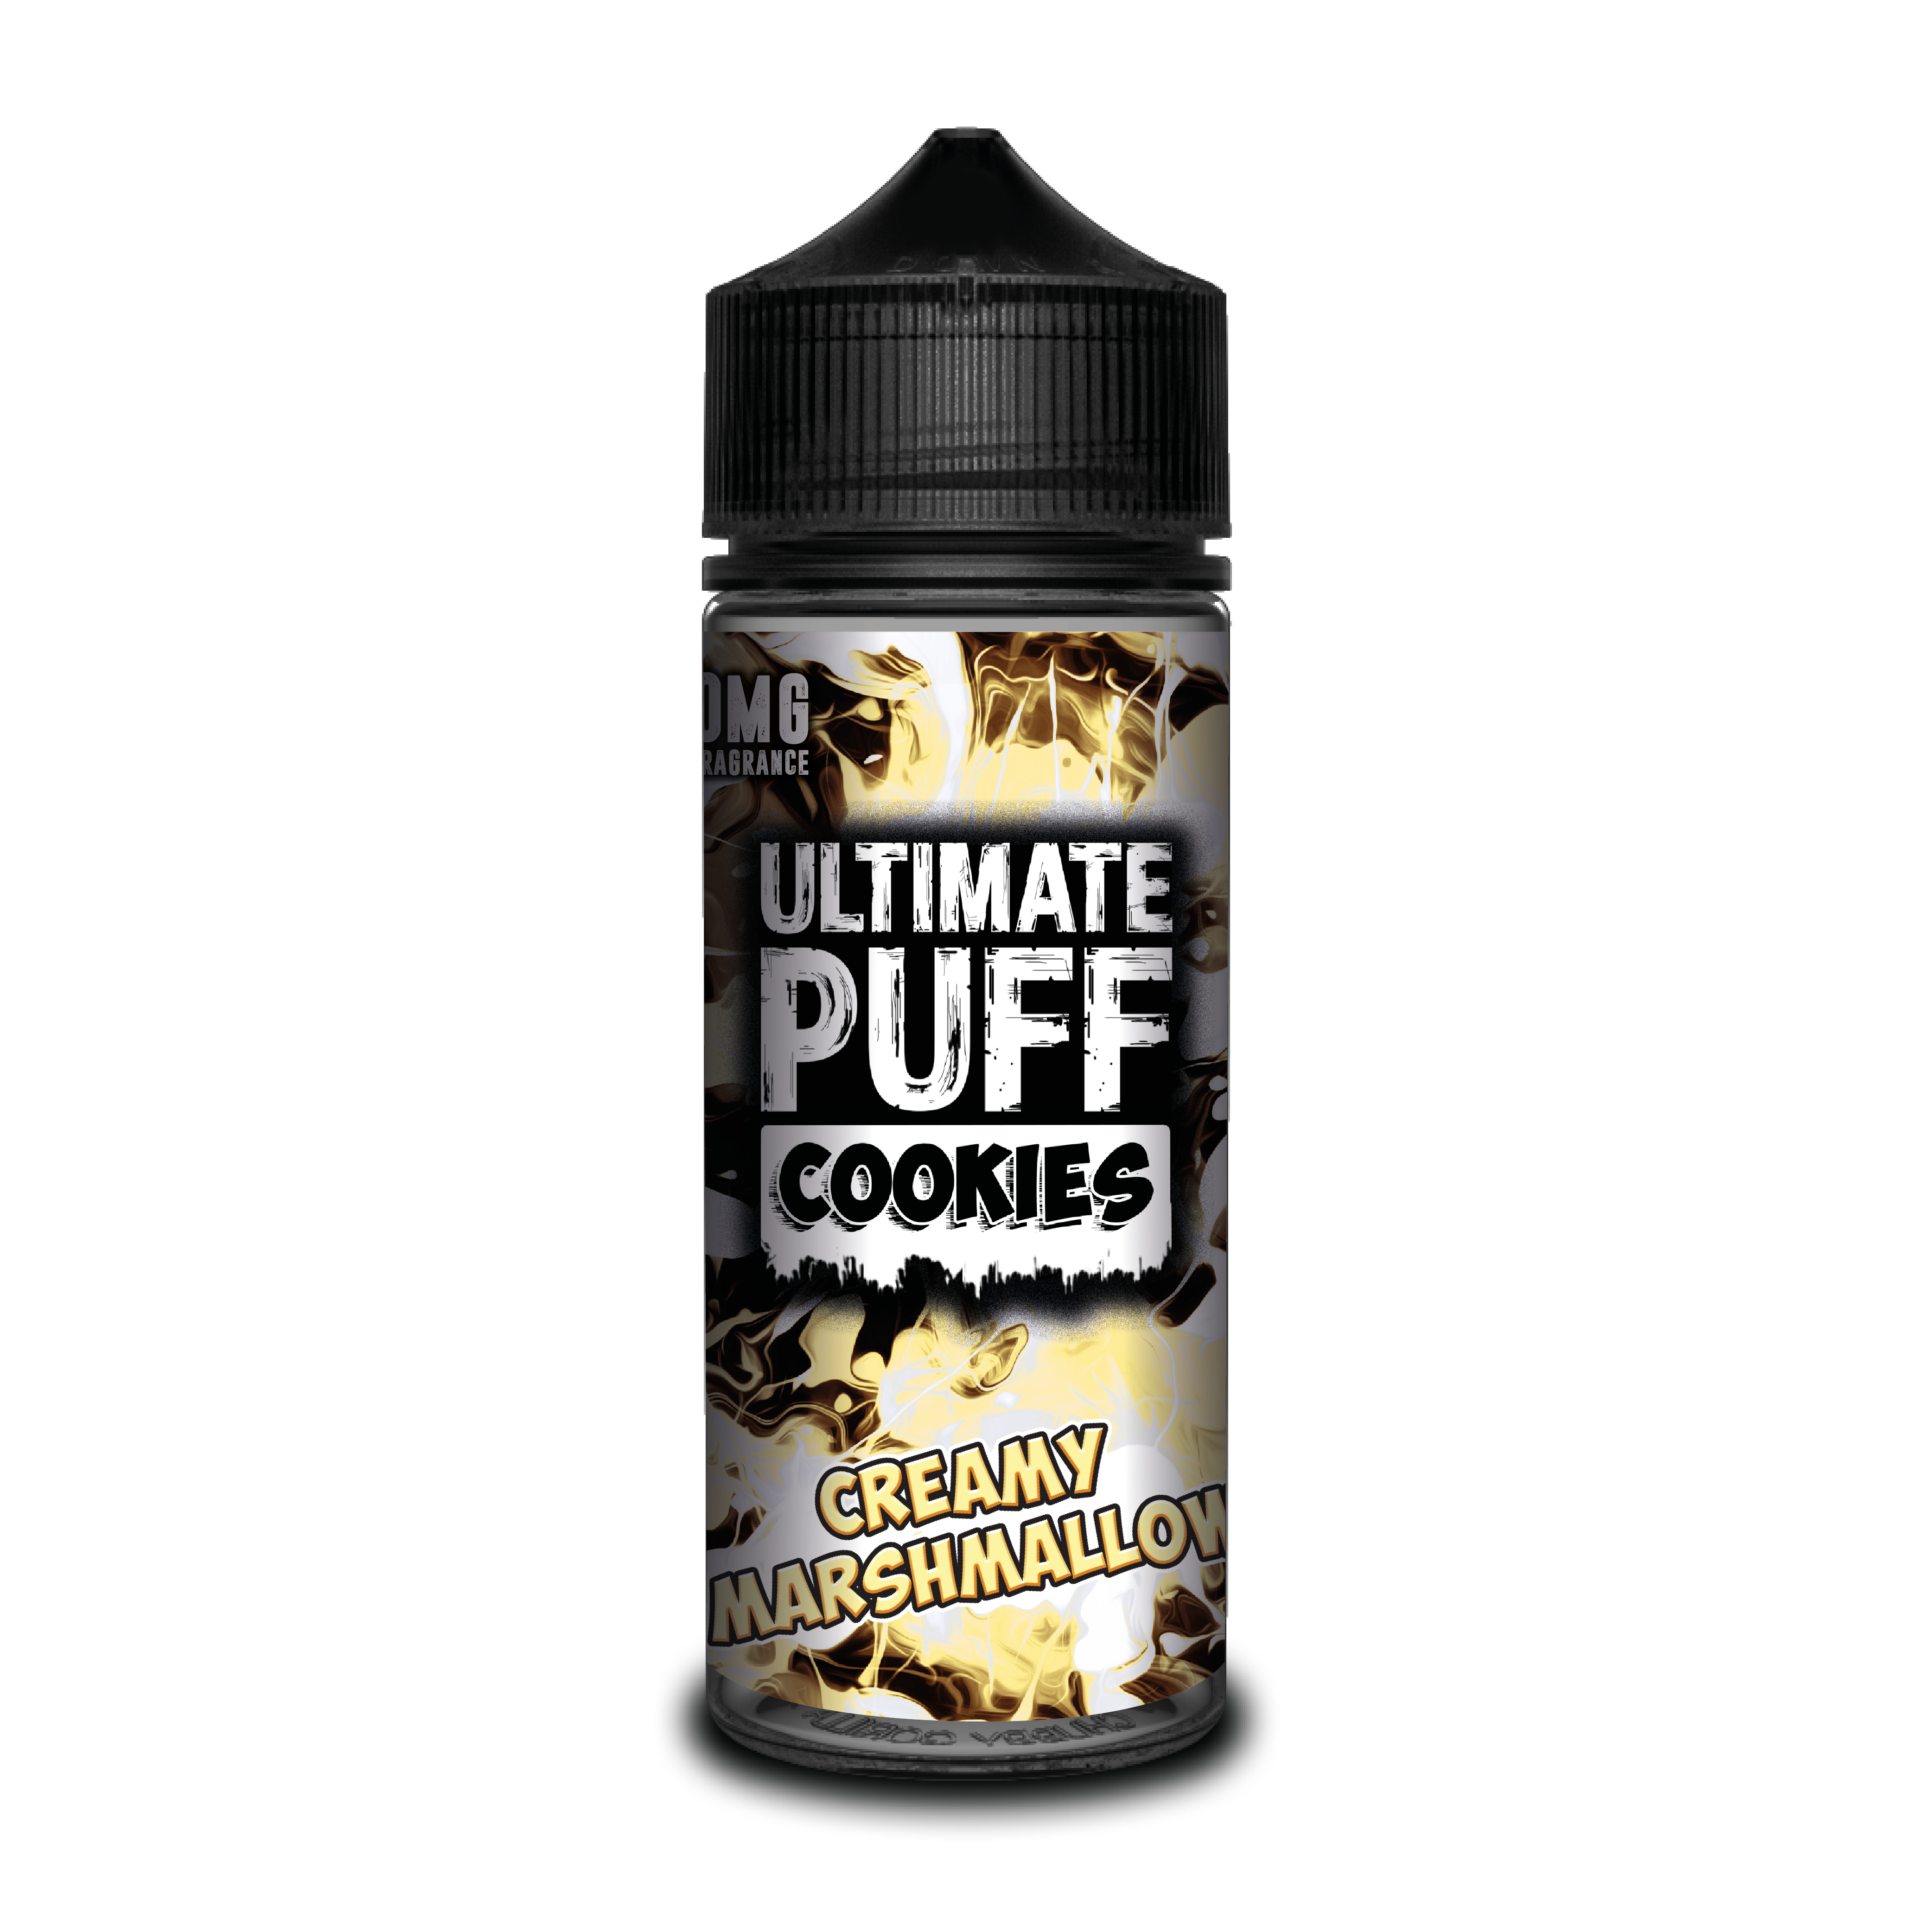 Creamy Marshmallow Cookies by Ultimate puff 100ml